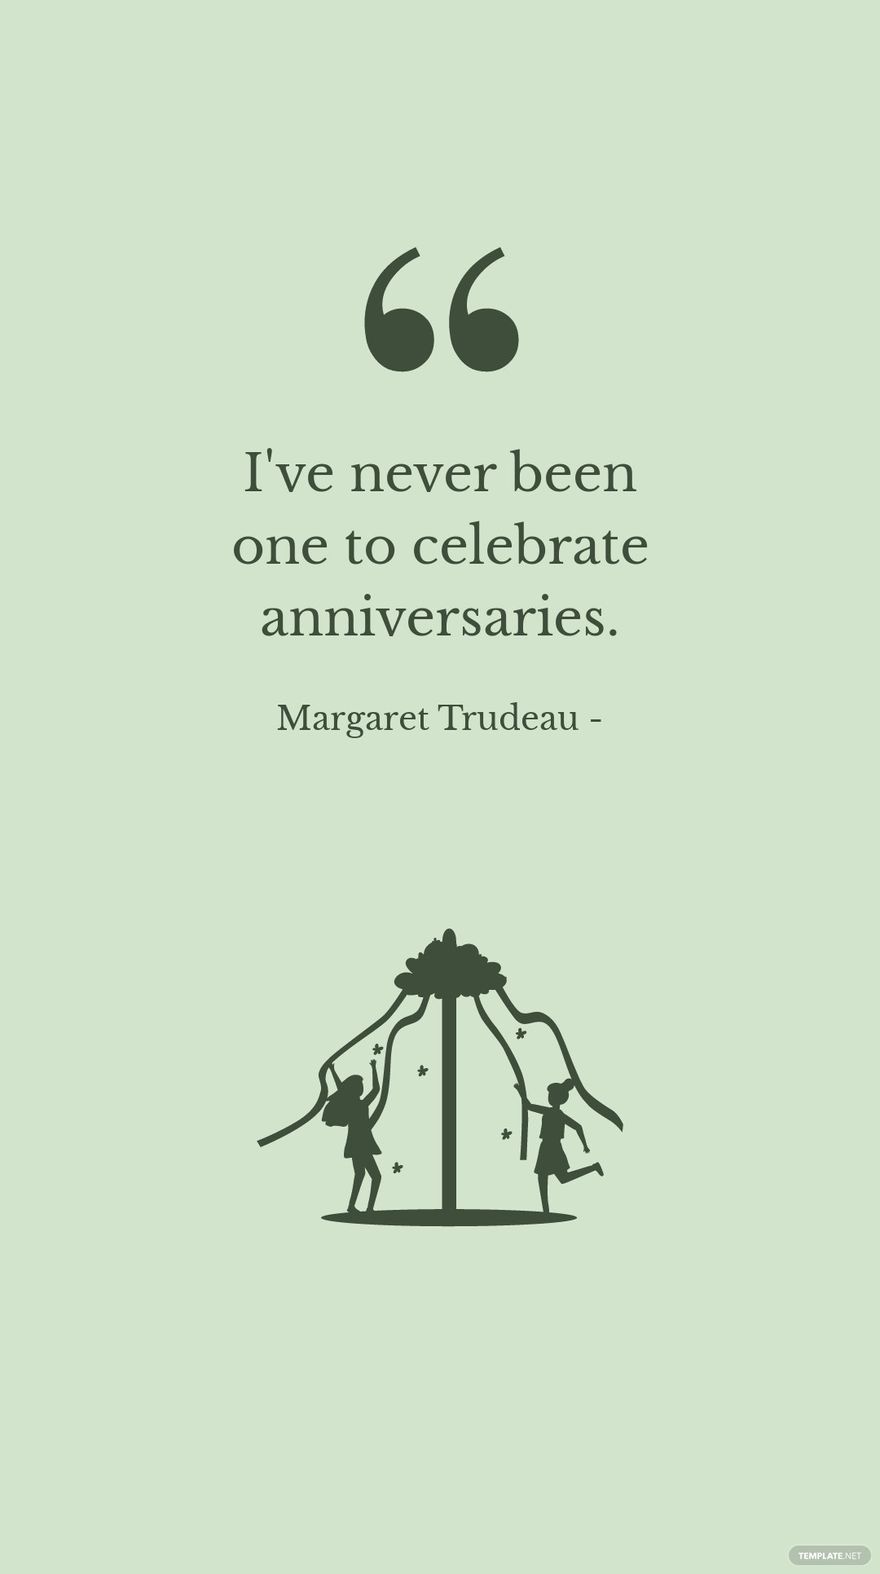 Margaret Trudeau - I've never been one to celebrate anniversaries. in JPG